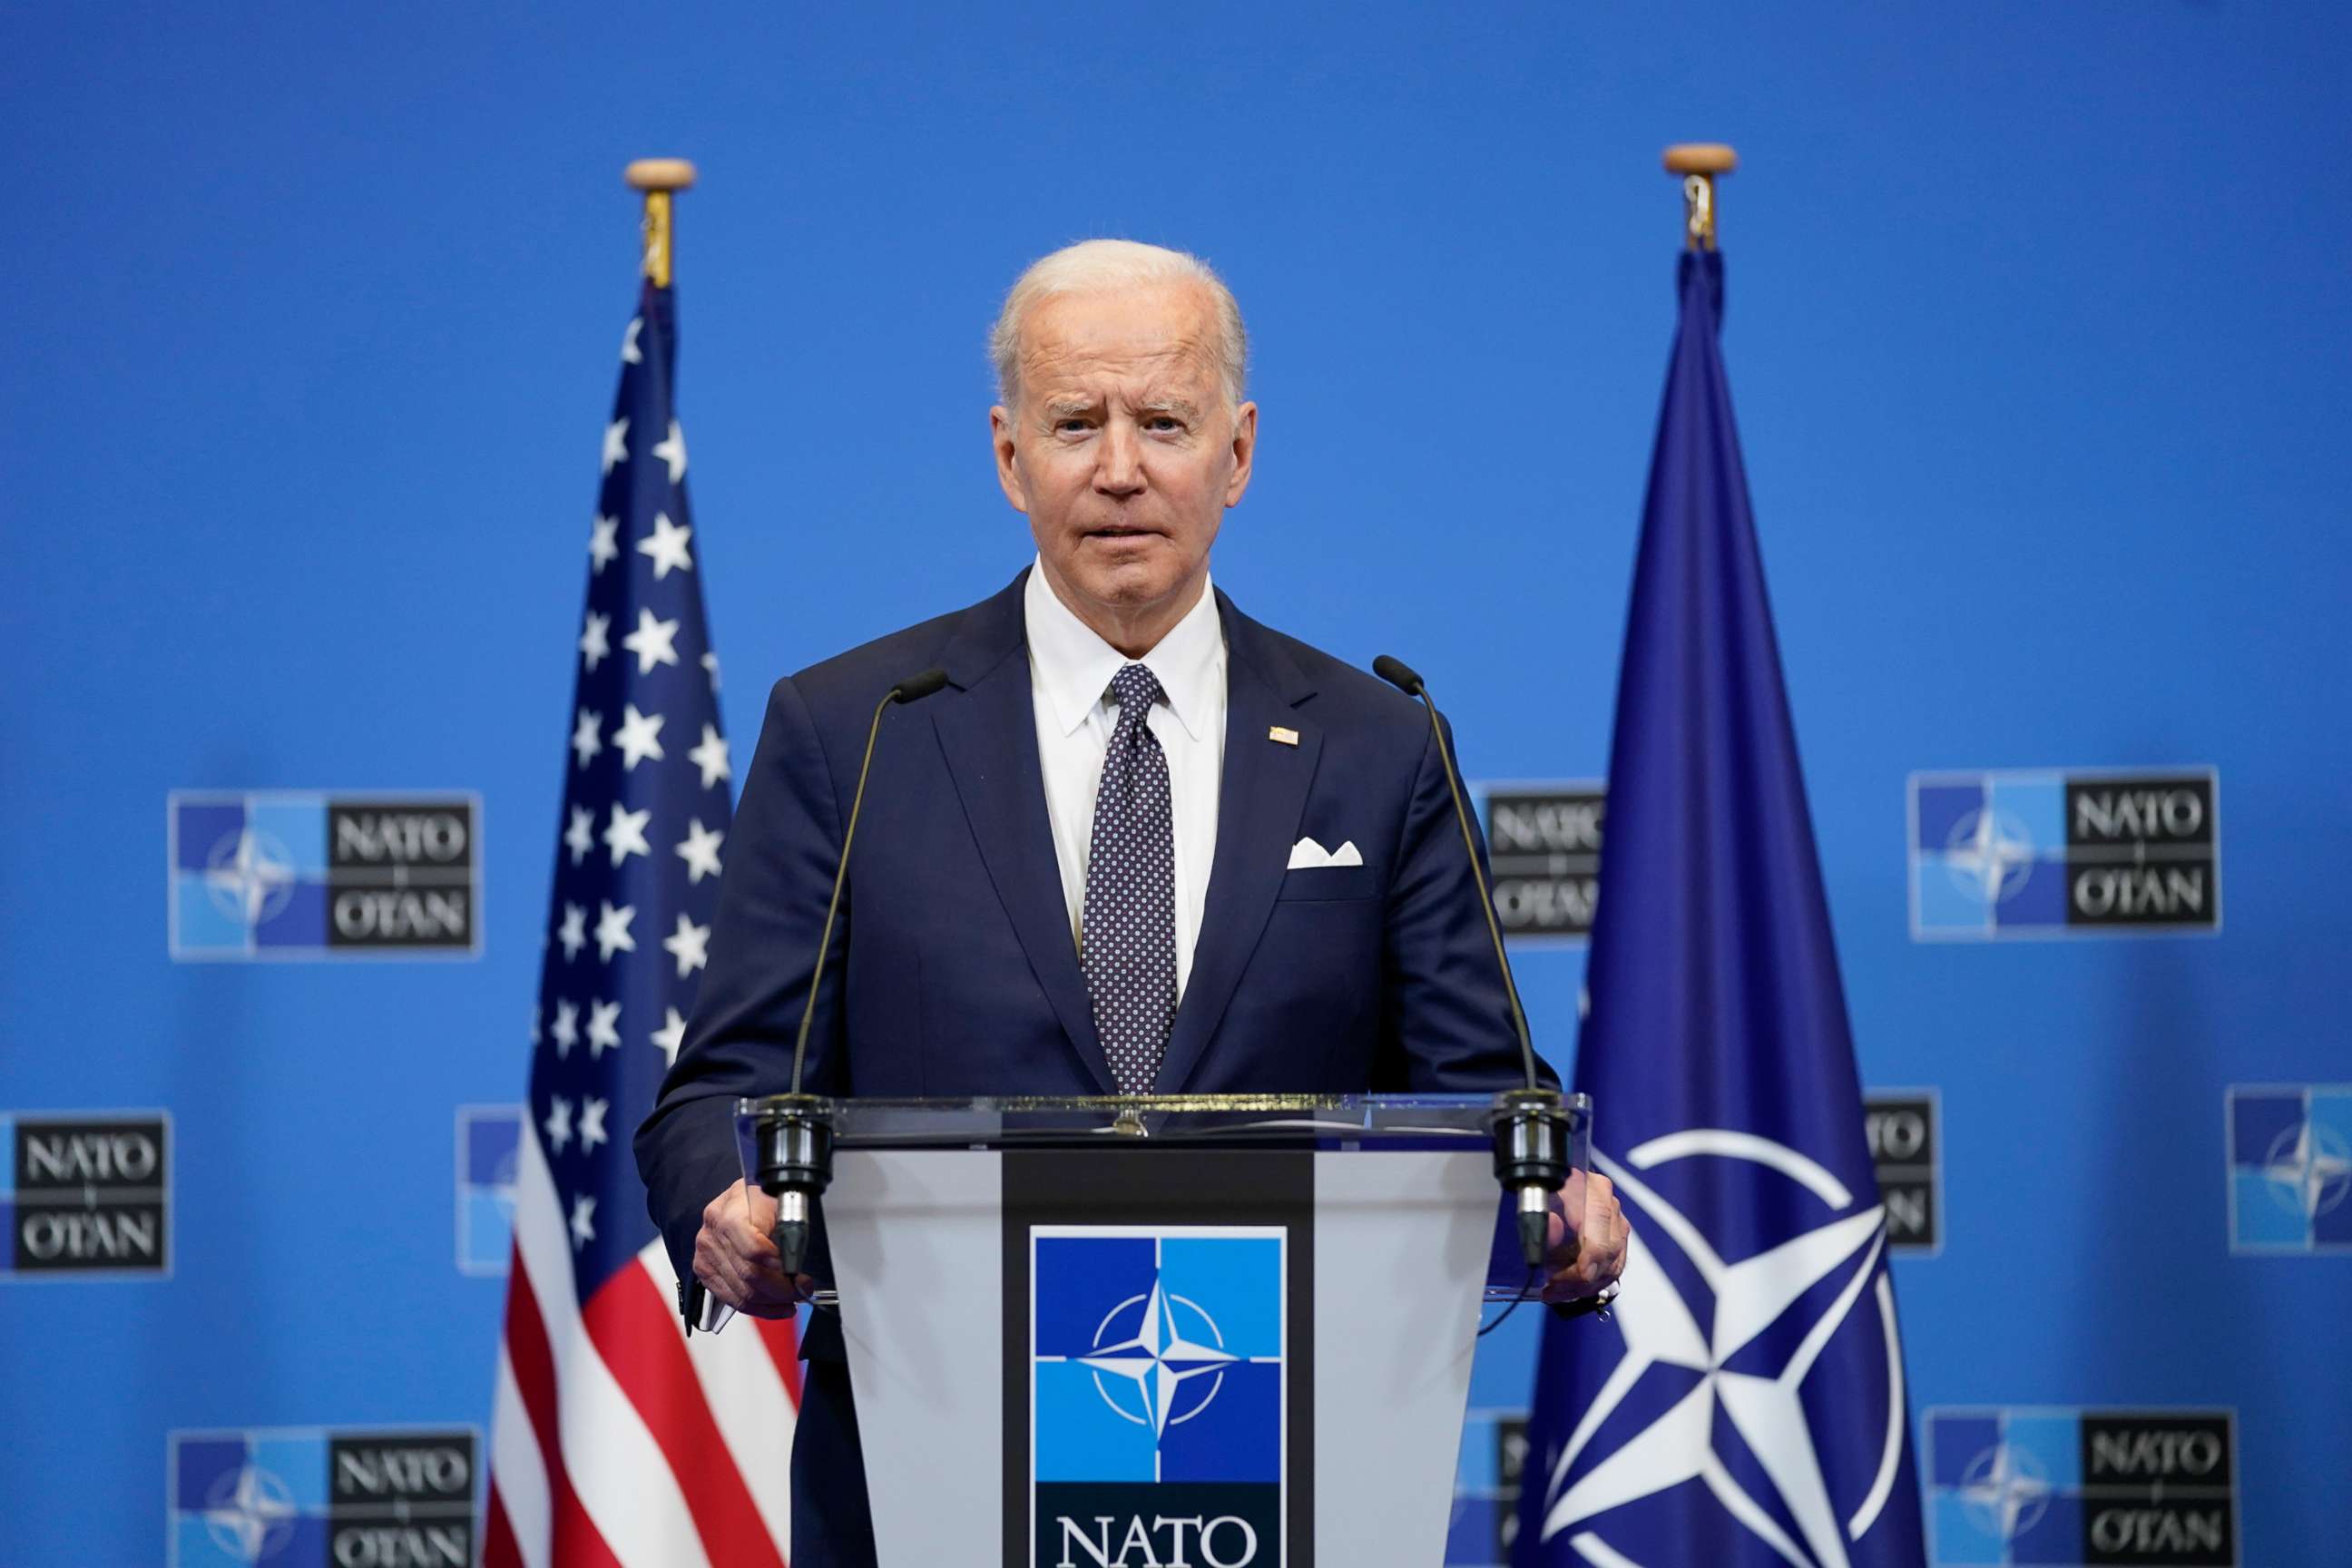 PHOTO: President Joe Biden speaks about the Russian invasion of Ukraine during a news conference after a NATO summit and Group of Seven meeting at NATO headquarters, March 24, 2022, in Brussels.